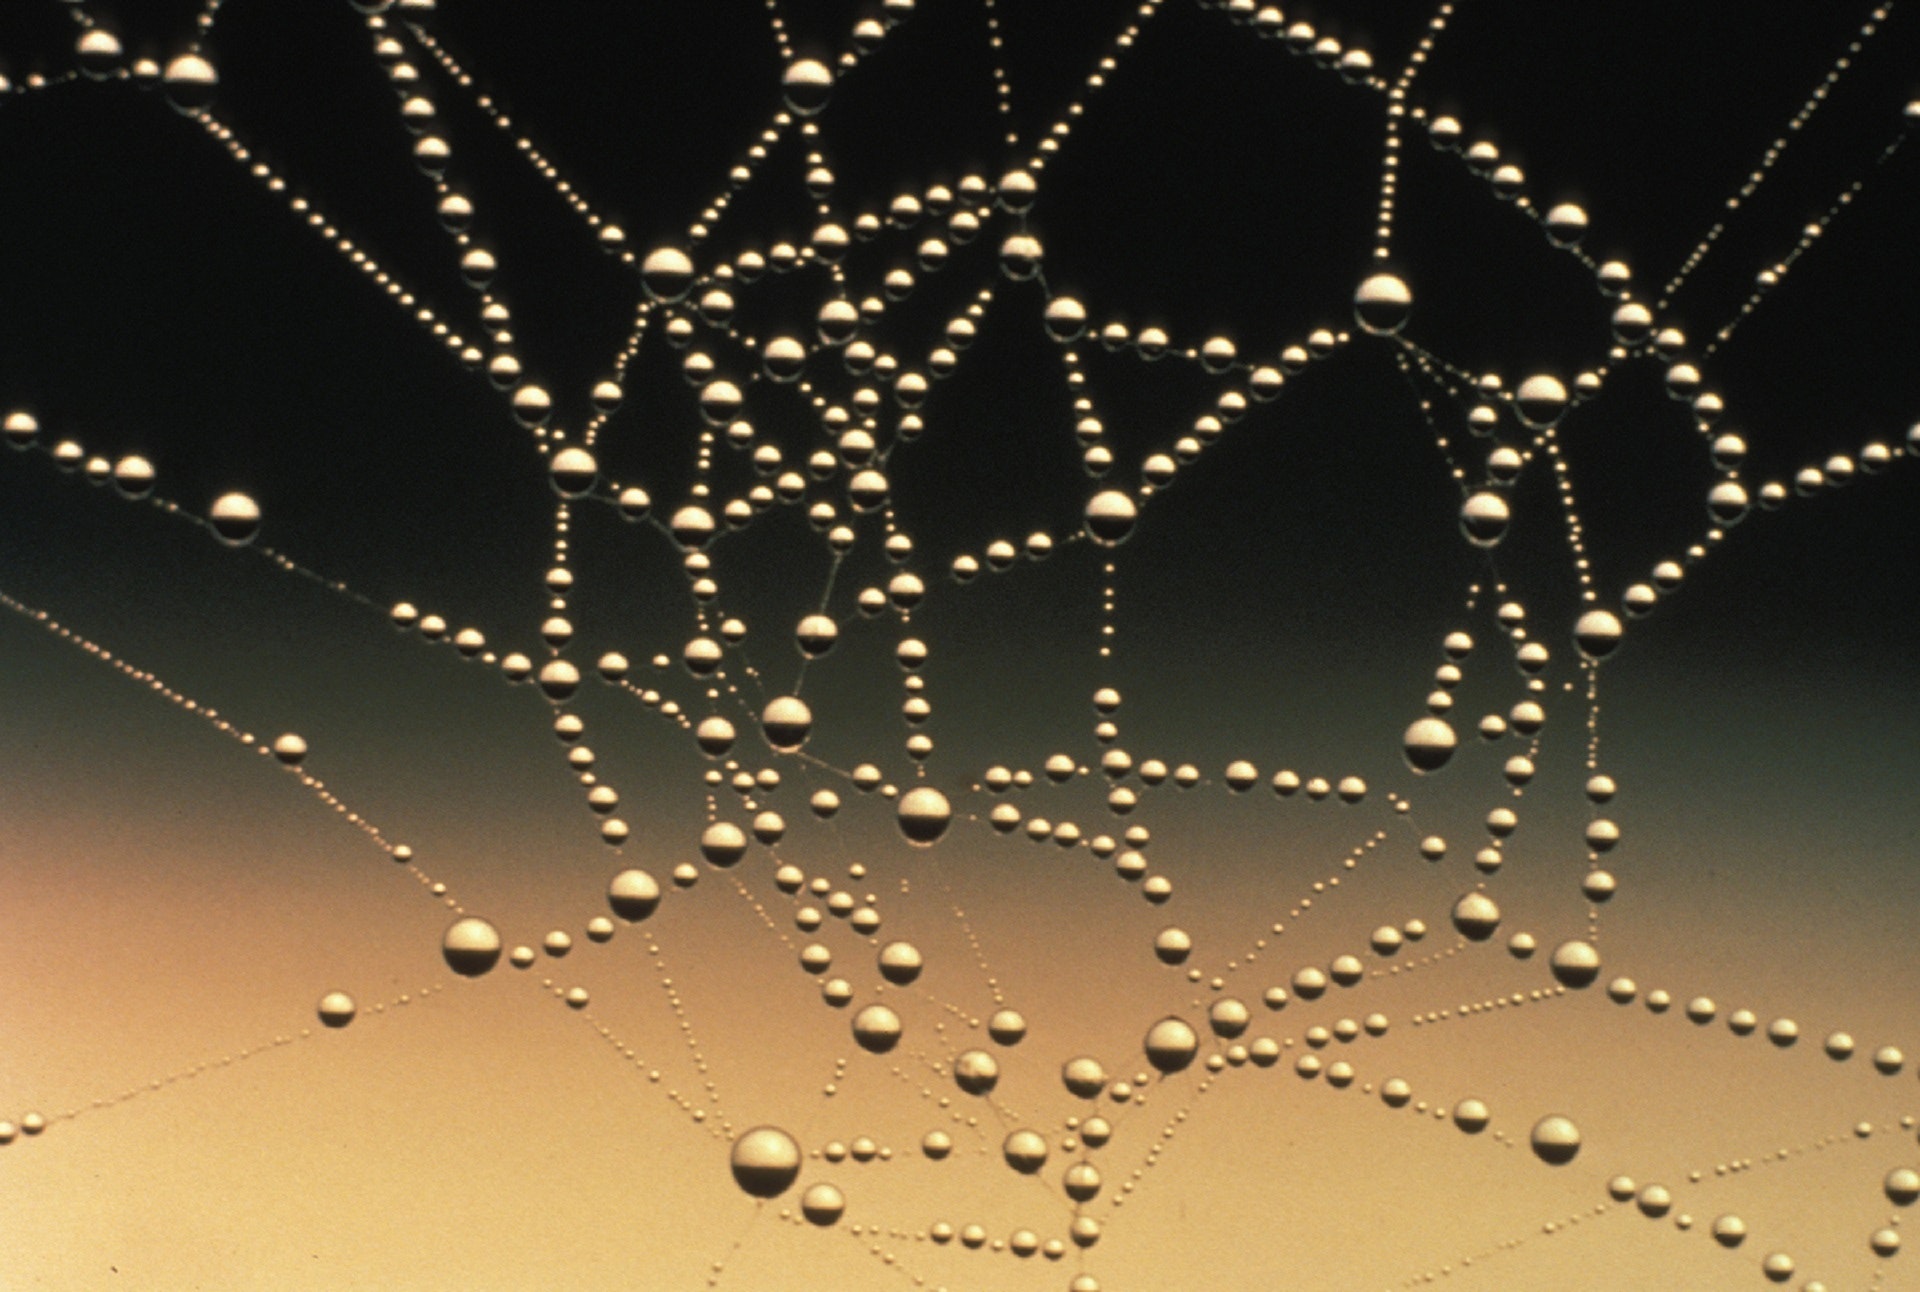 spiderweb with dewdrops